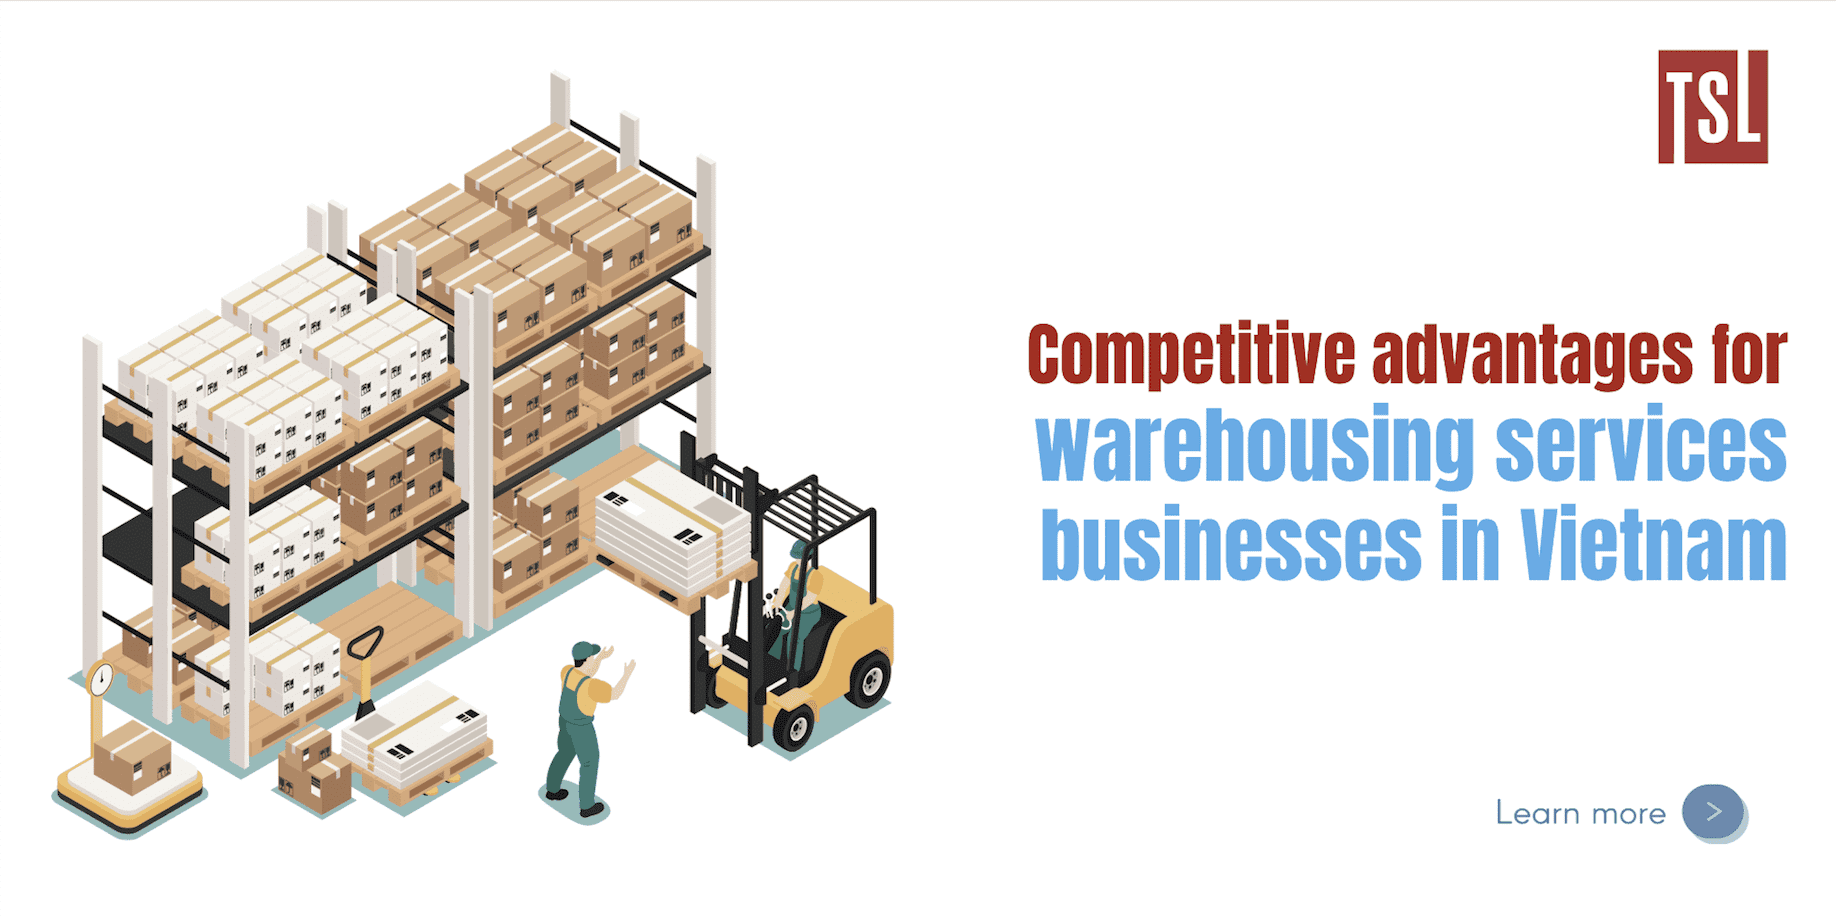 Competitive advantages for warehousing service businesses in Vietnam